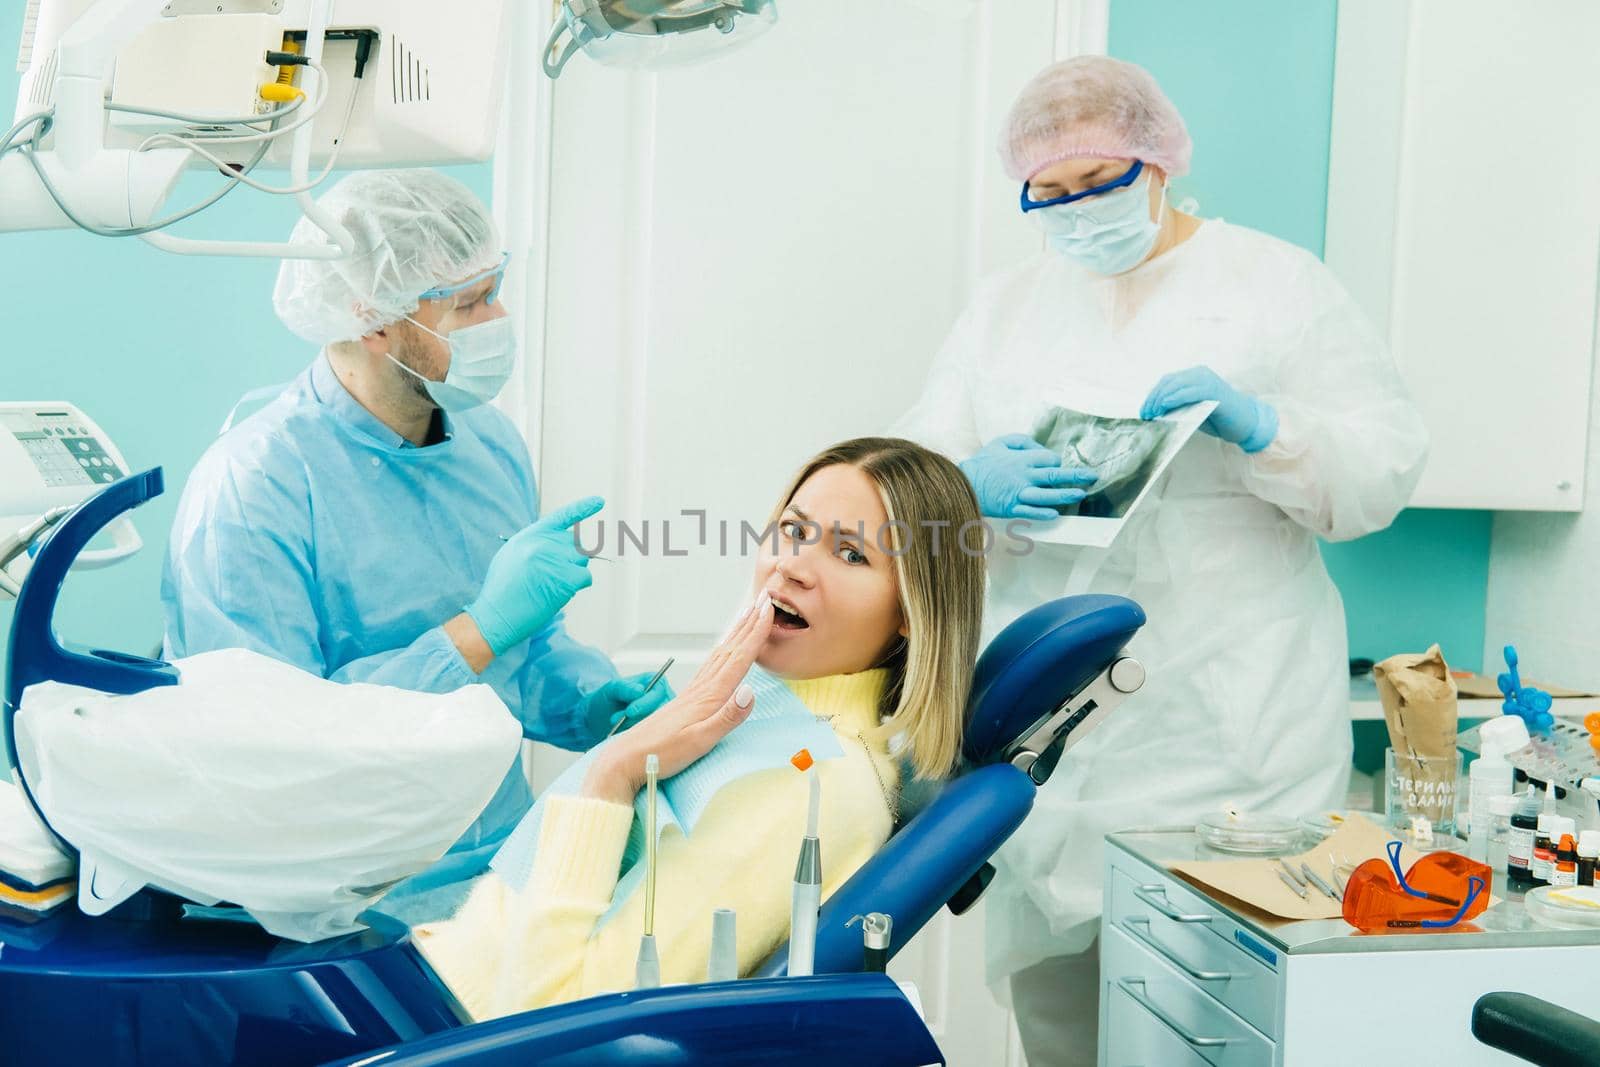 The dentist explains the details of the X-ray to his colleague, the patient is surprised by what is happening.